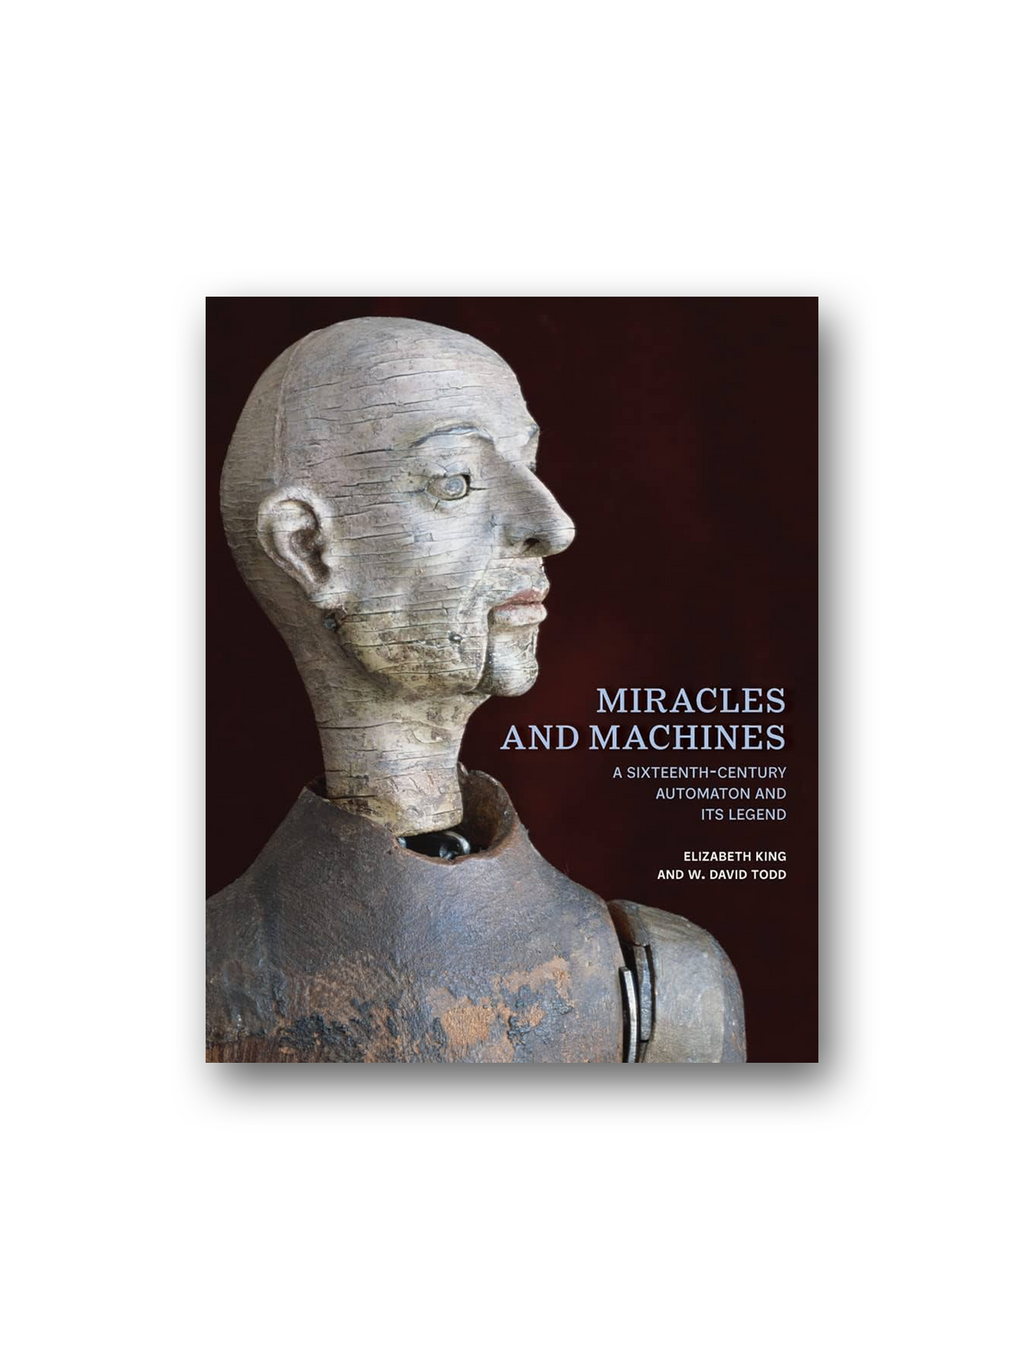 Miracles and Machines: A Sixteenth-Century Automaton and Its Legend